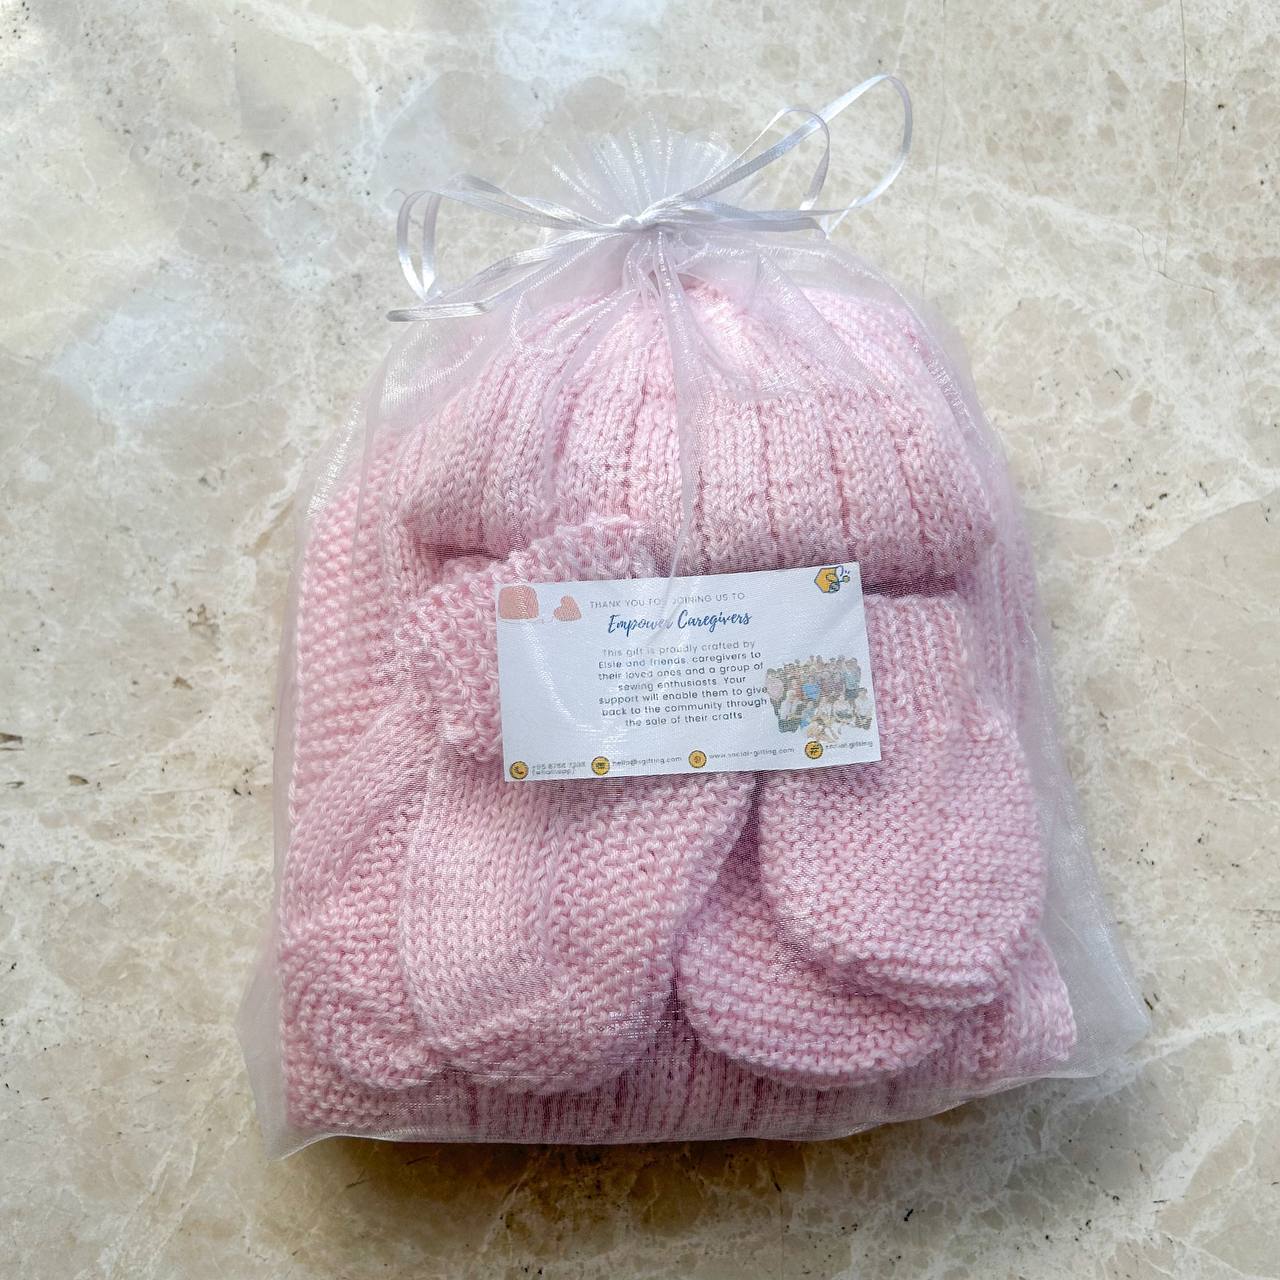 Knitted Baby Blanket Set